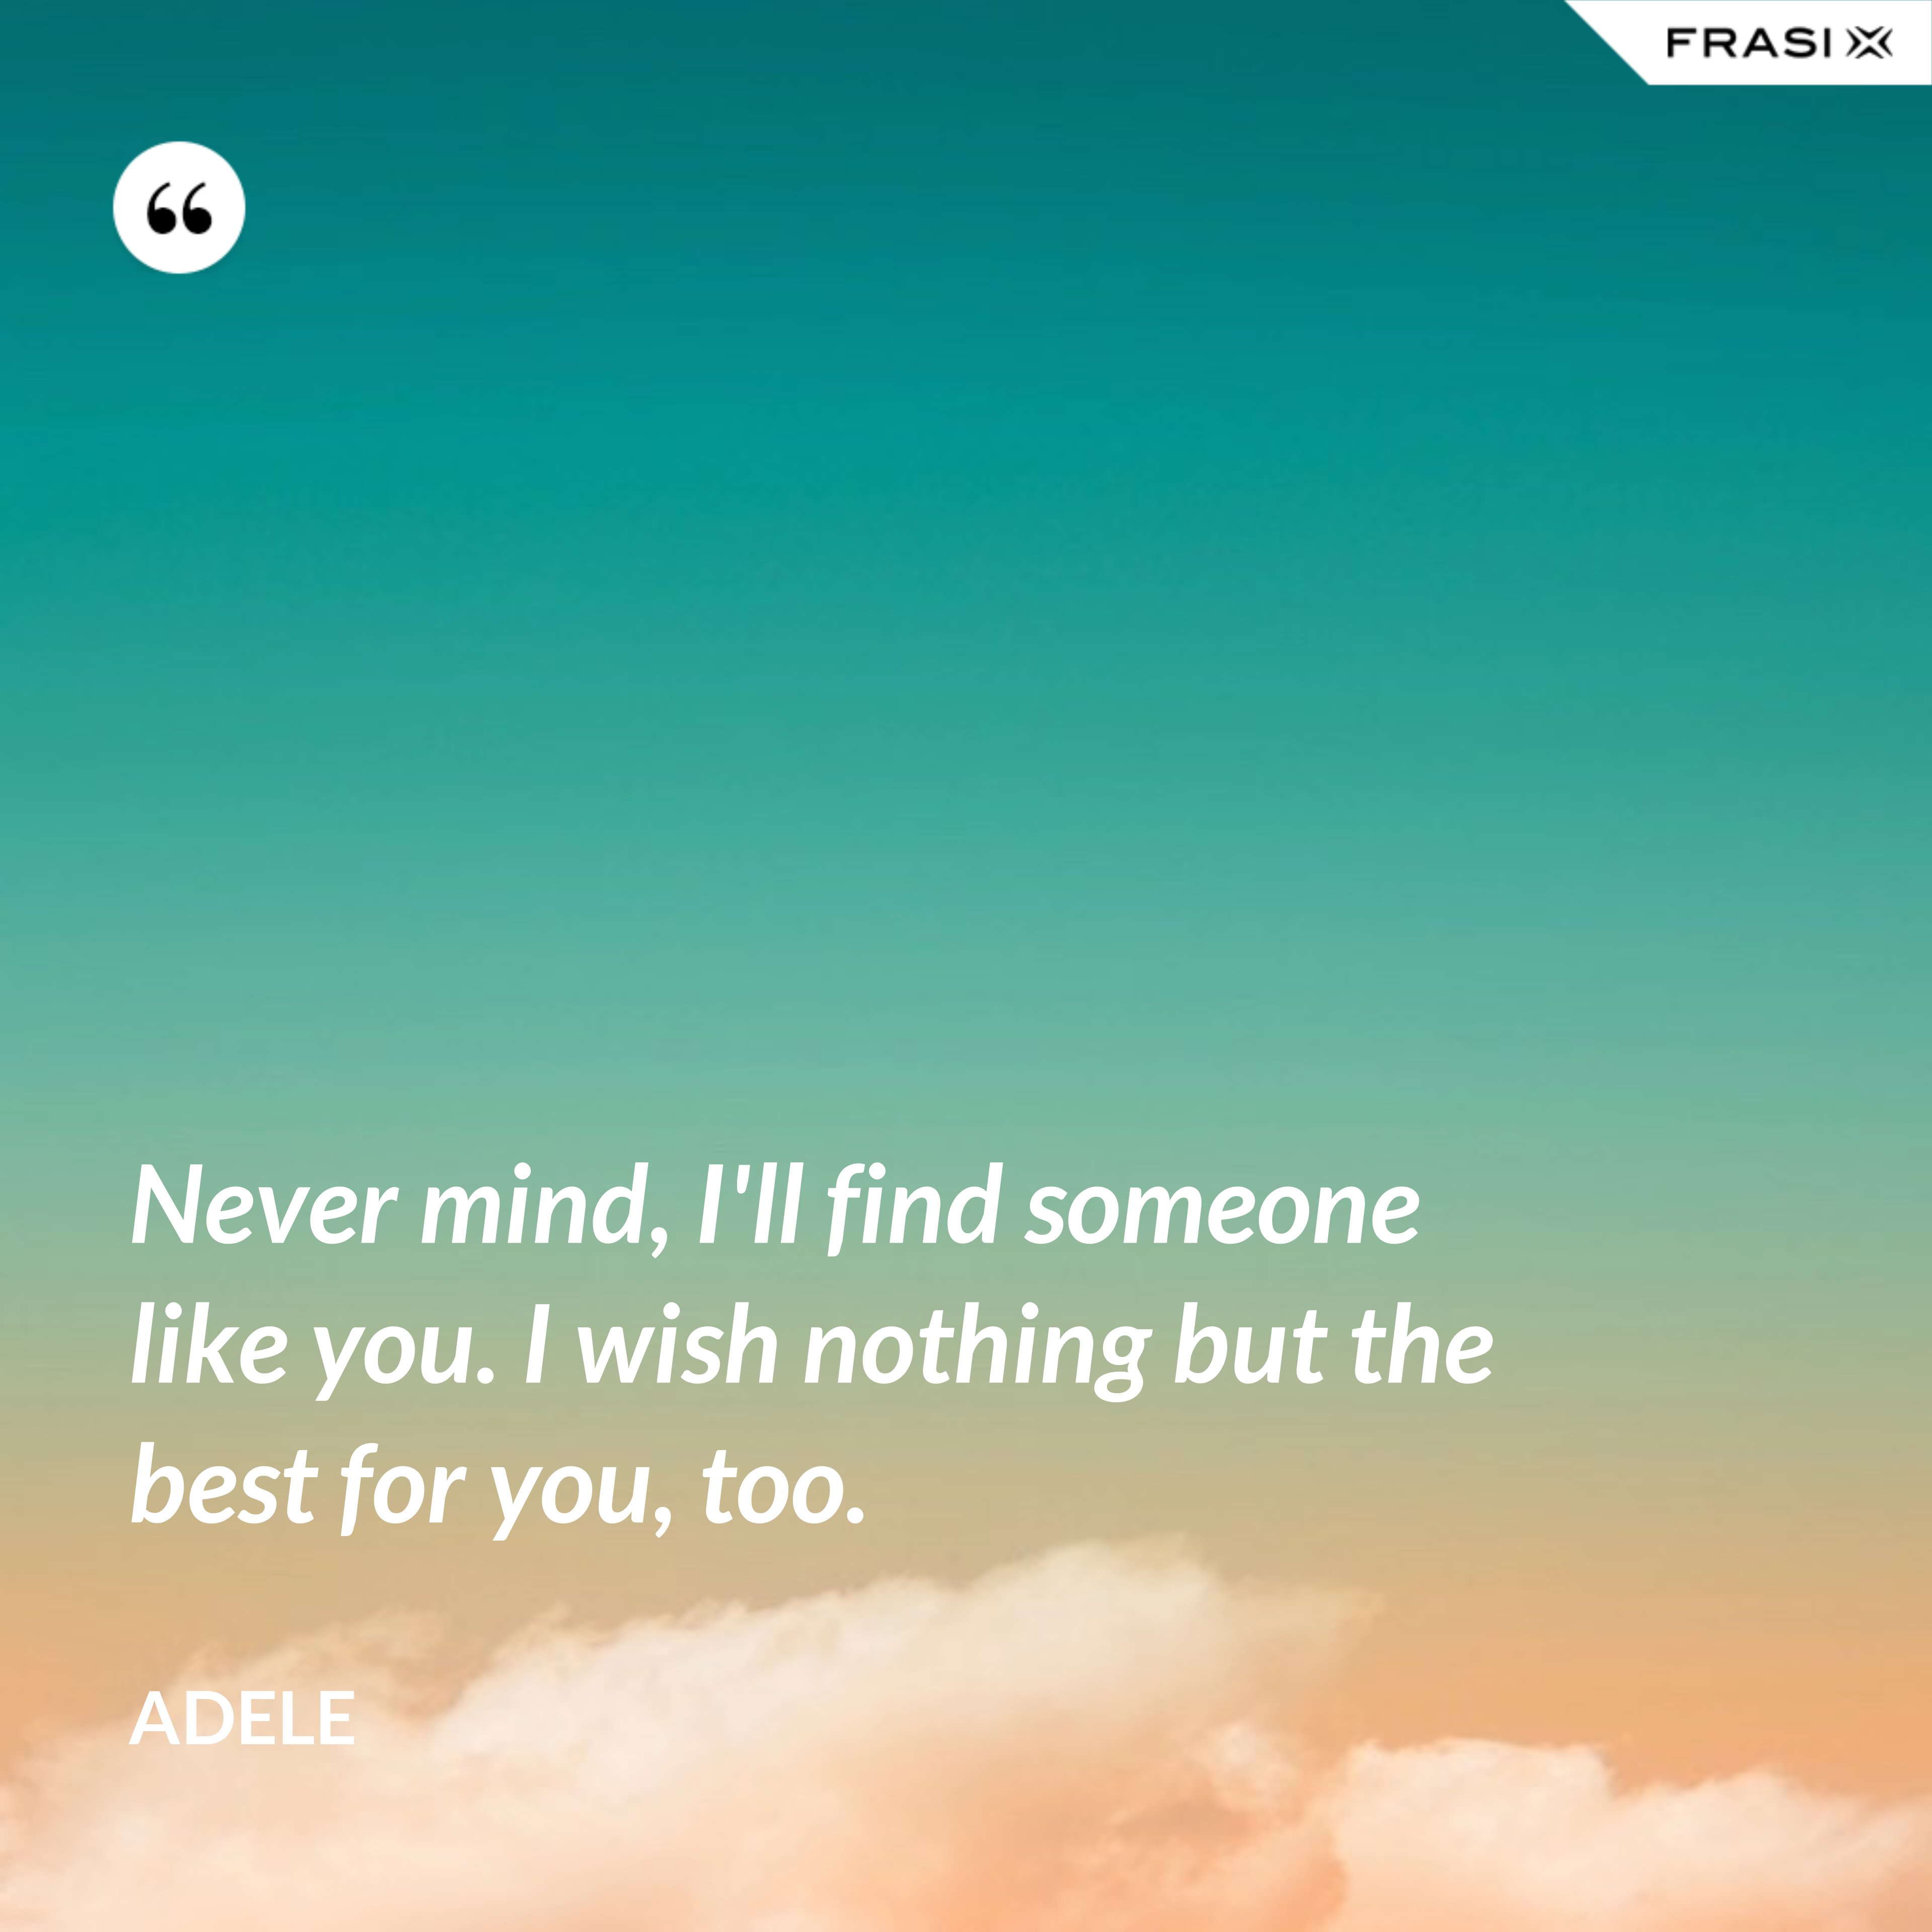 Never mind, I'll find someone like you. I wish nothing but the best for you, too. - Adele